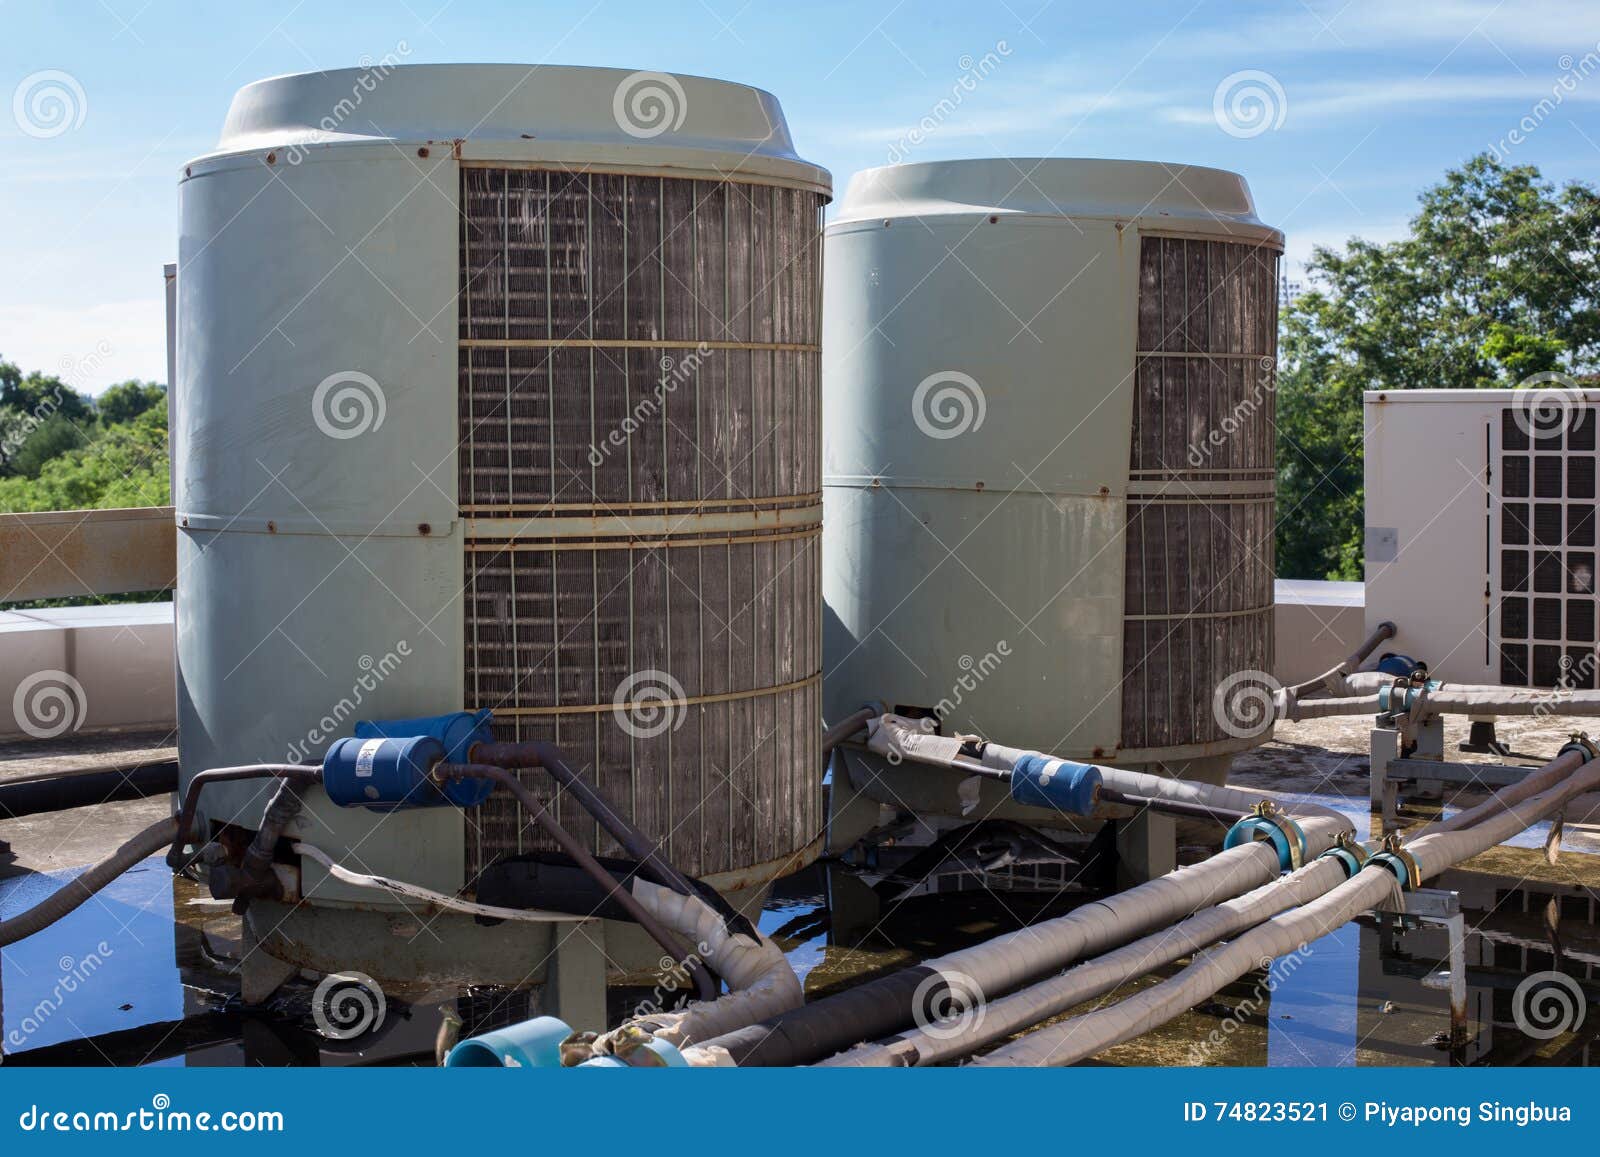 Air compressors on roof of factory with blue sky background.